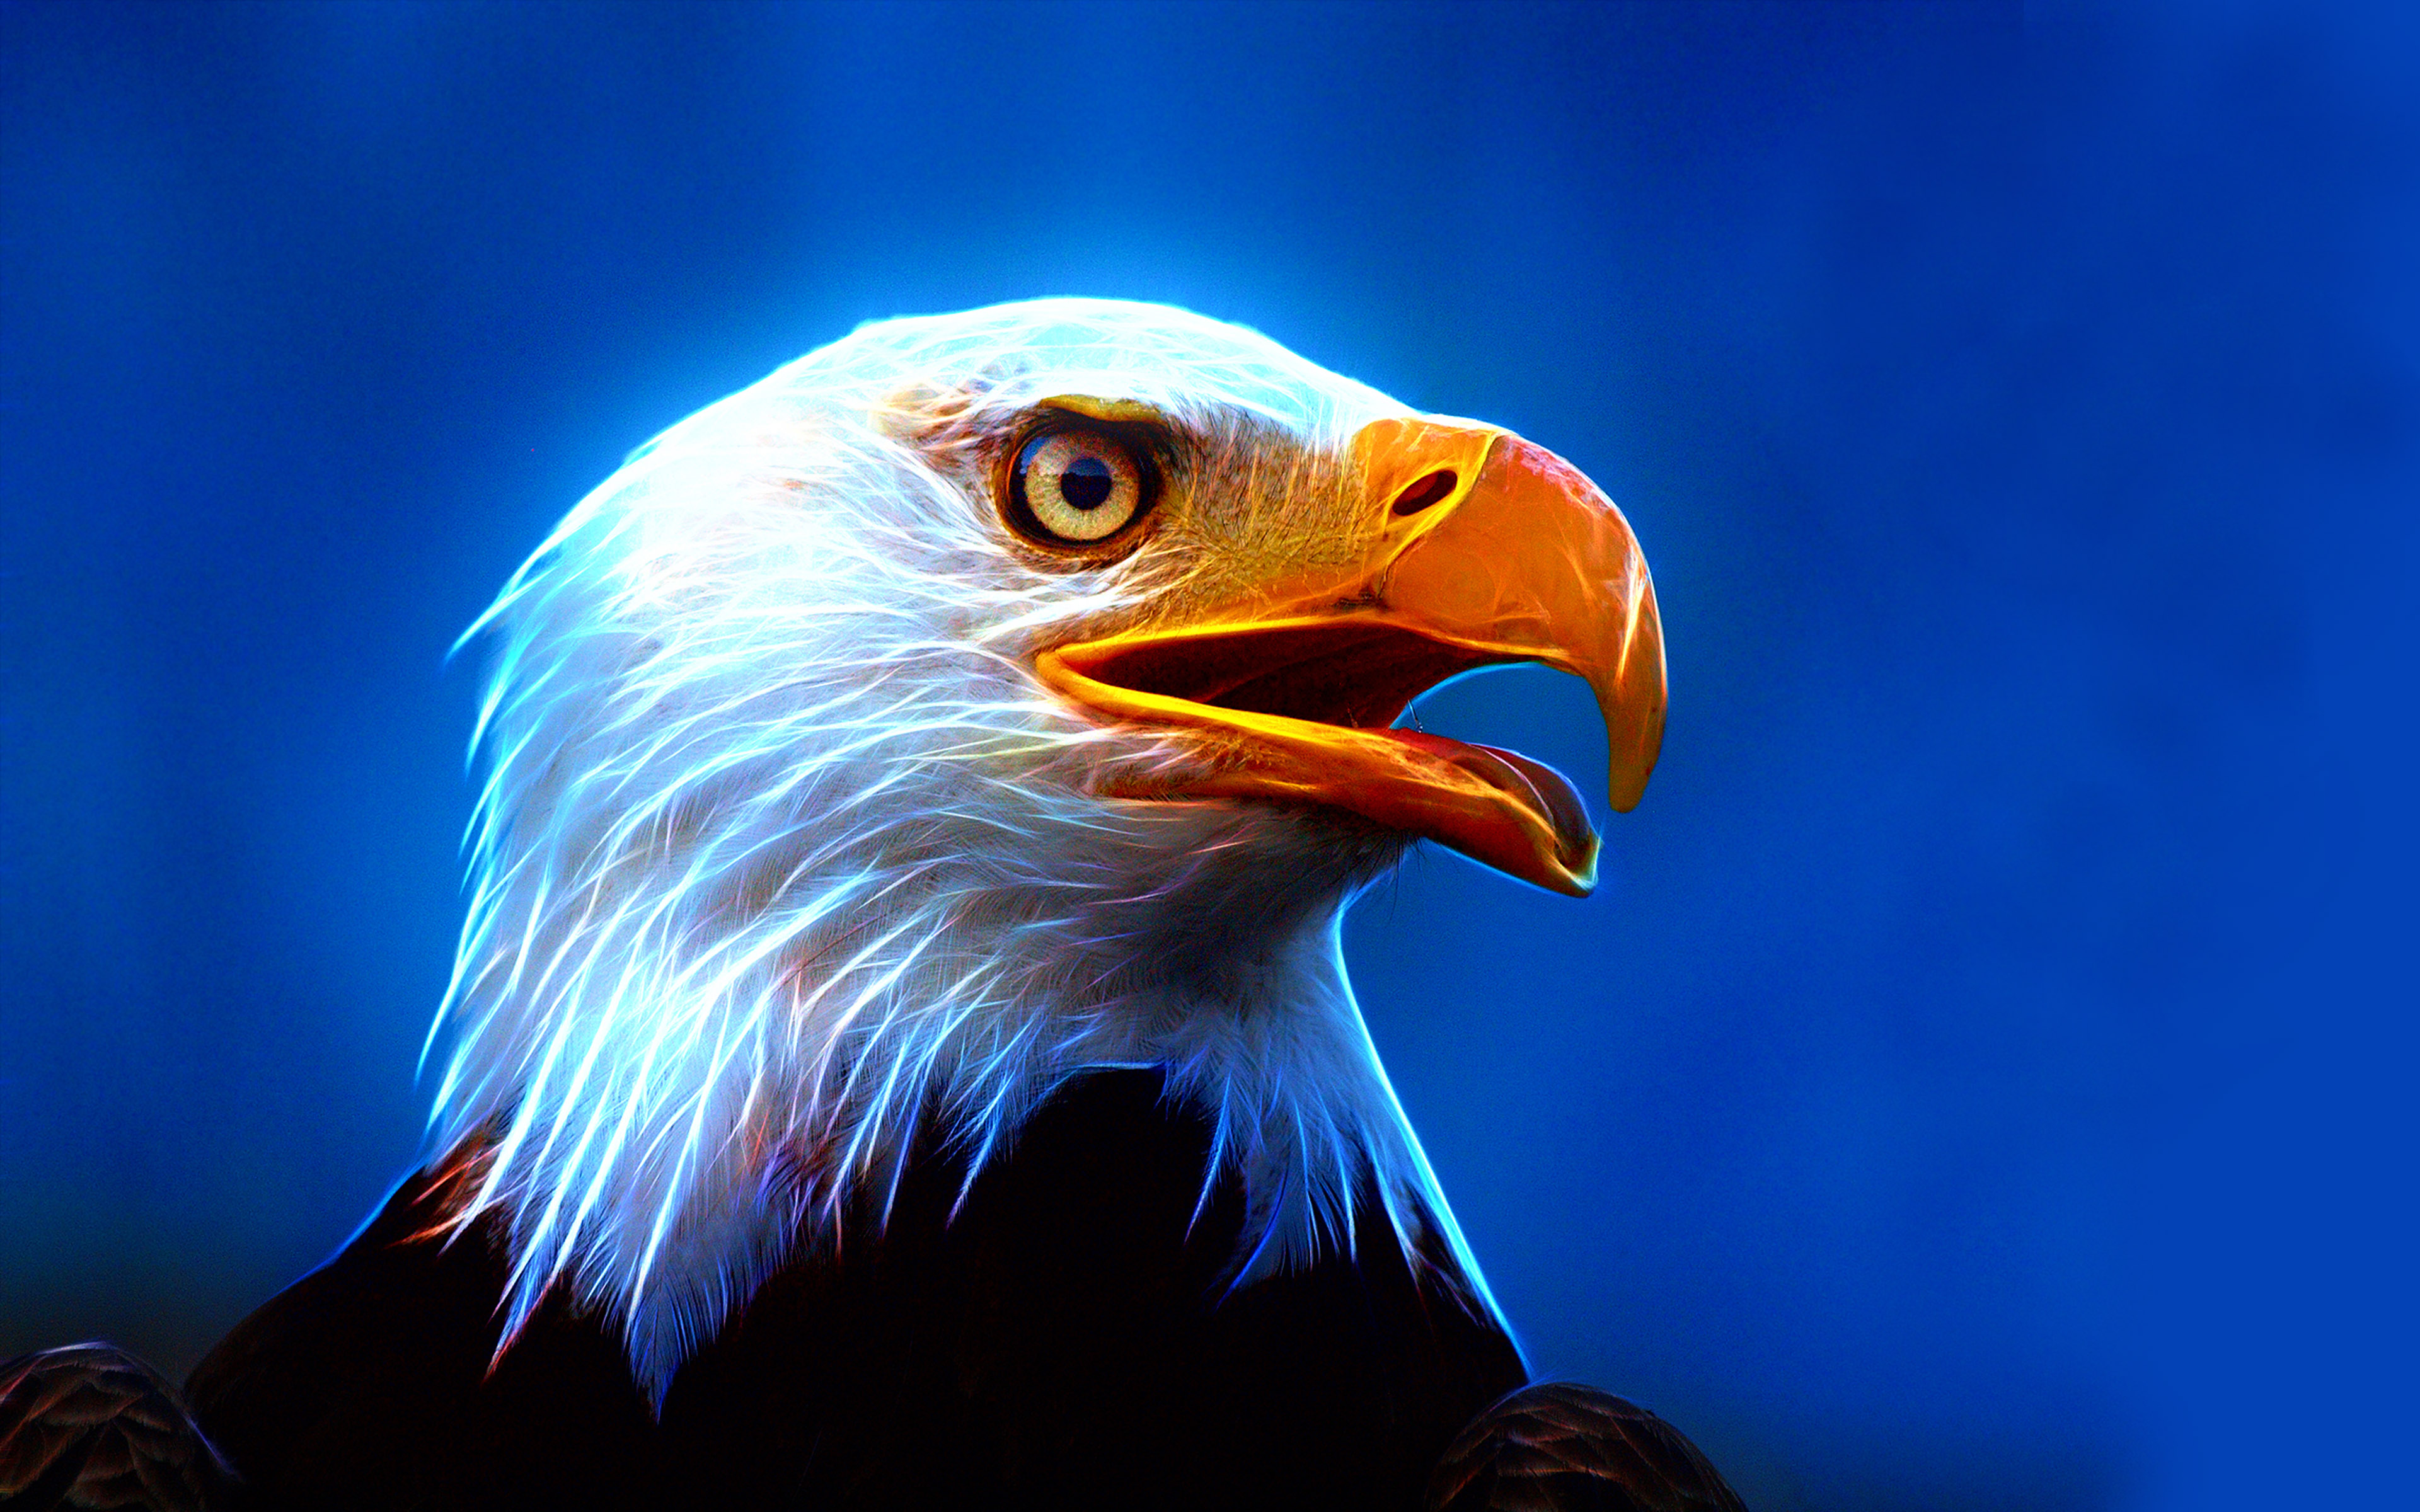 Eagle Ultra Hd Wallpaper For Mobile Phone And Pc : 